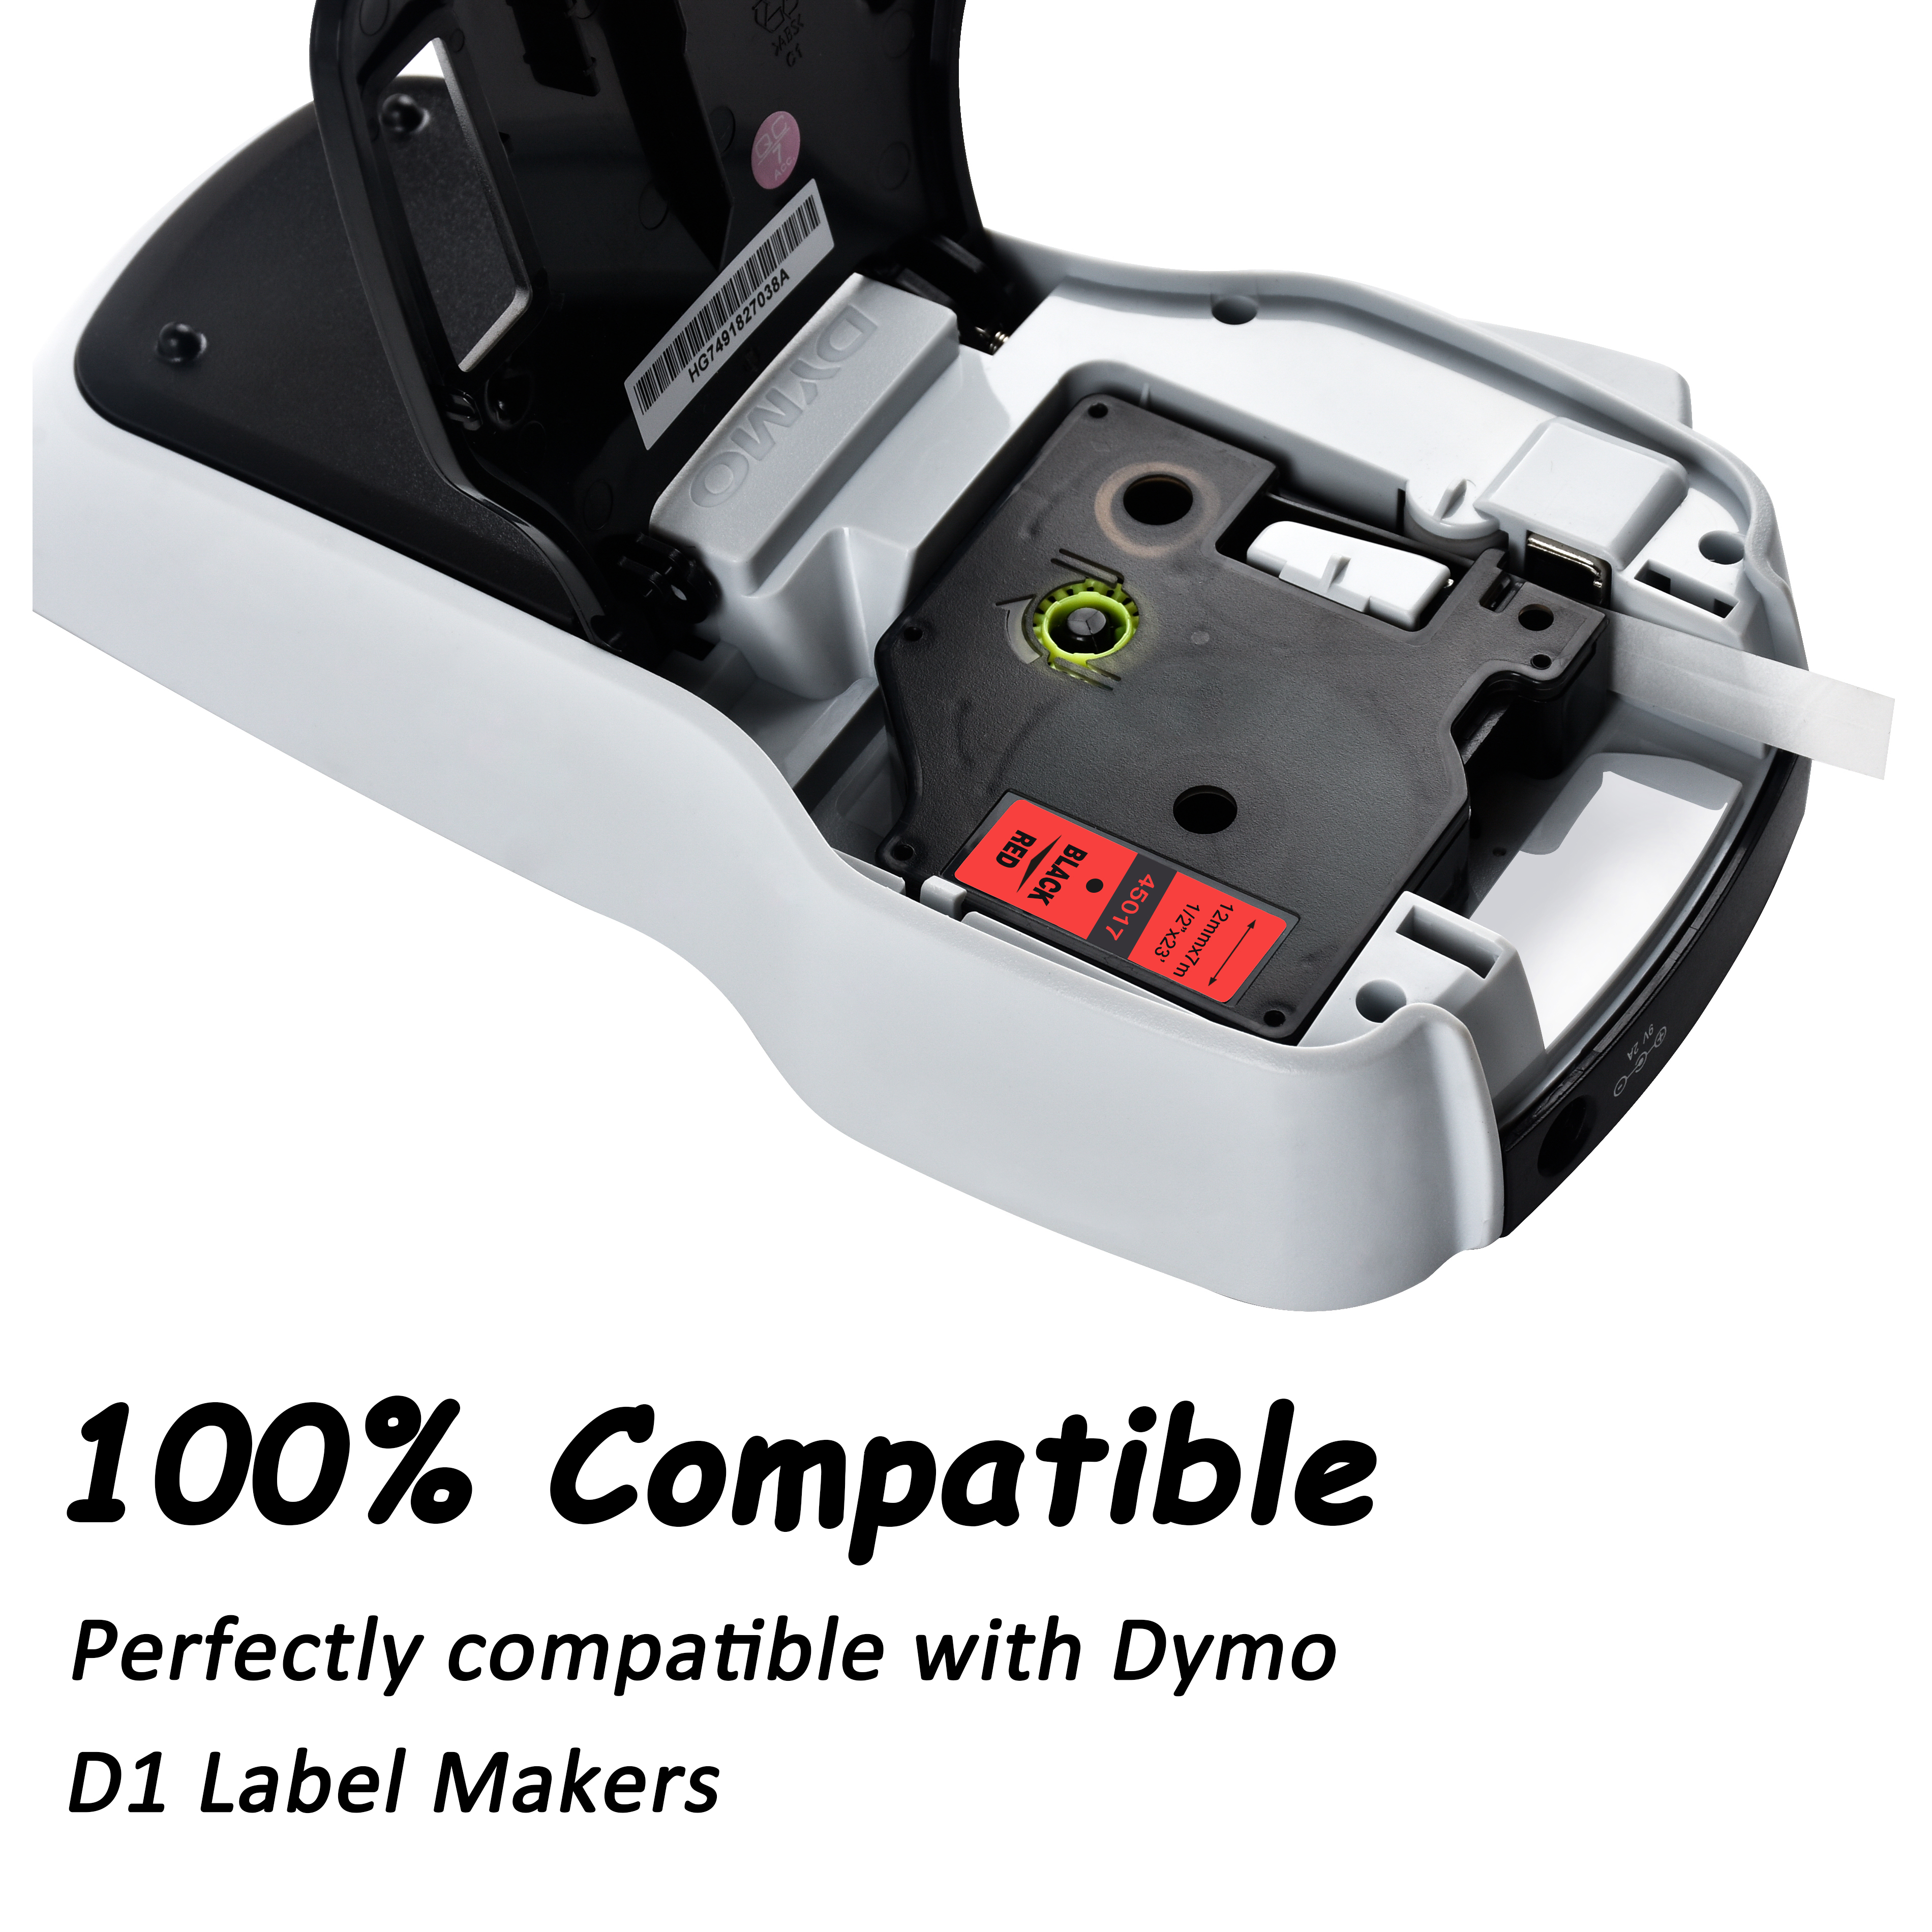 Cidy 45017 Compatible Dymo D1 manager 12mm black on red label tape for Dymo Label Printer DYMO LM160 LM280 dymo PNP